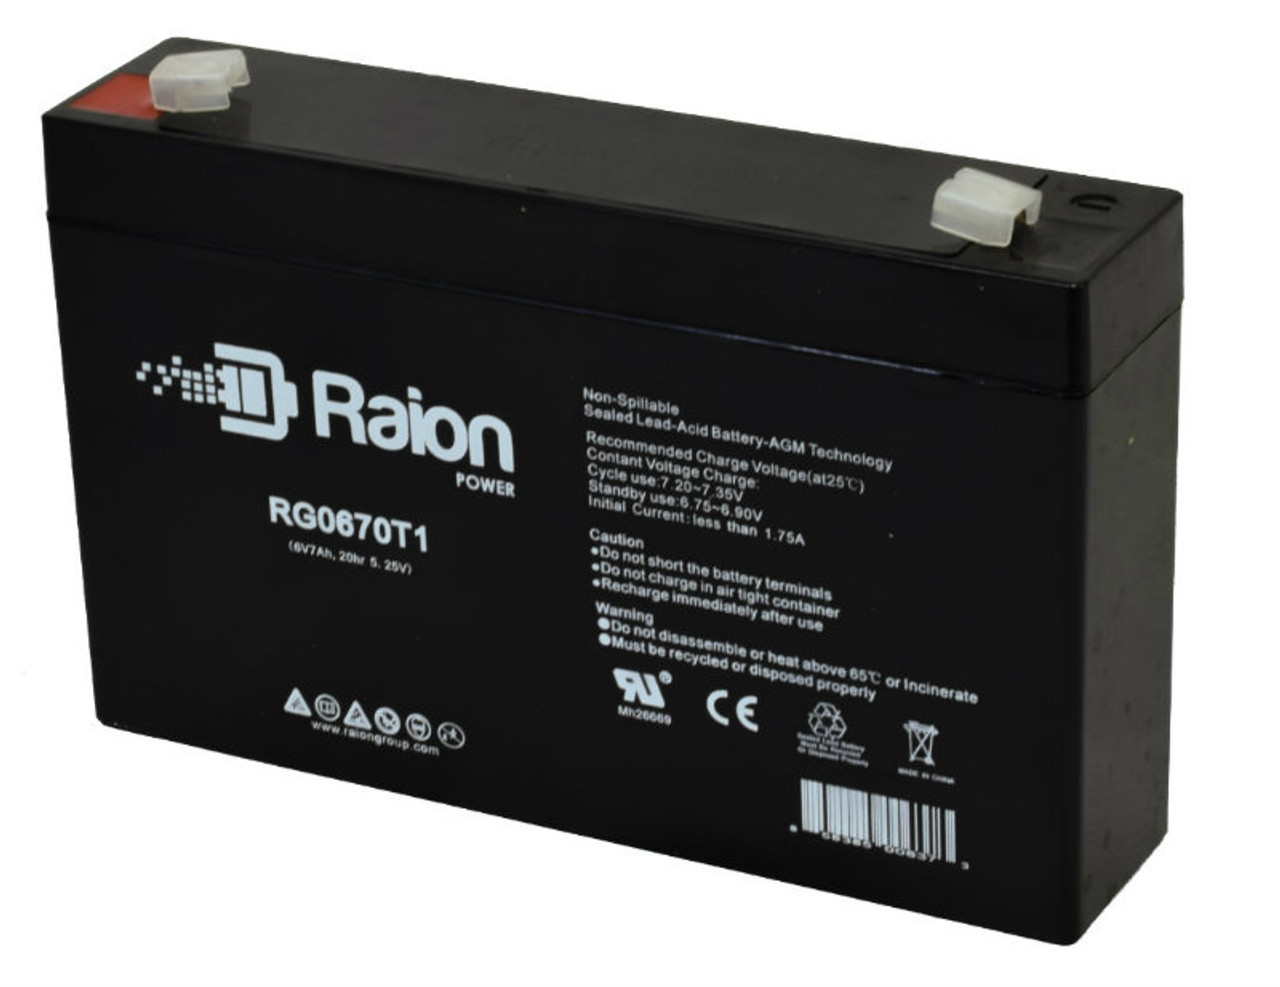 Raion Power RG0670T1 6V 7Ah Replacement Battery Cartridge for IMED PUMP/CONTROLLER 1310 Medical Equipment